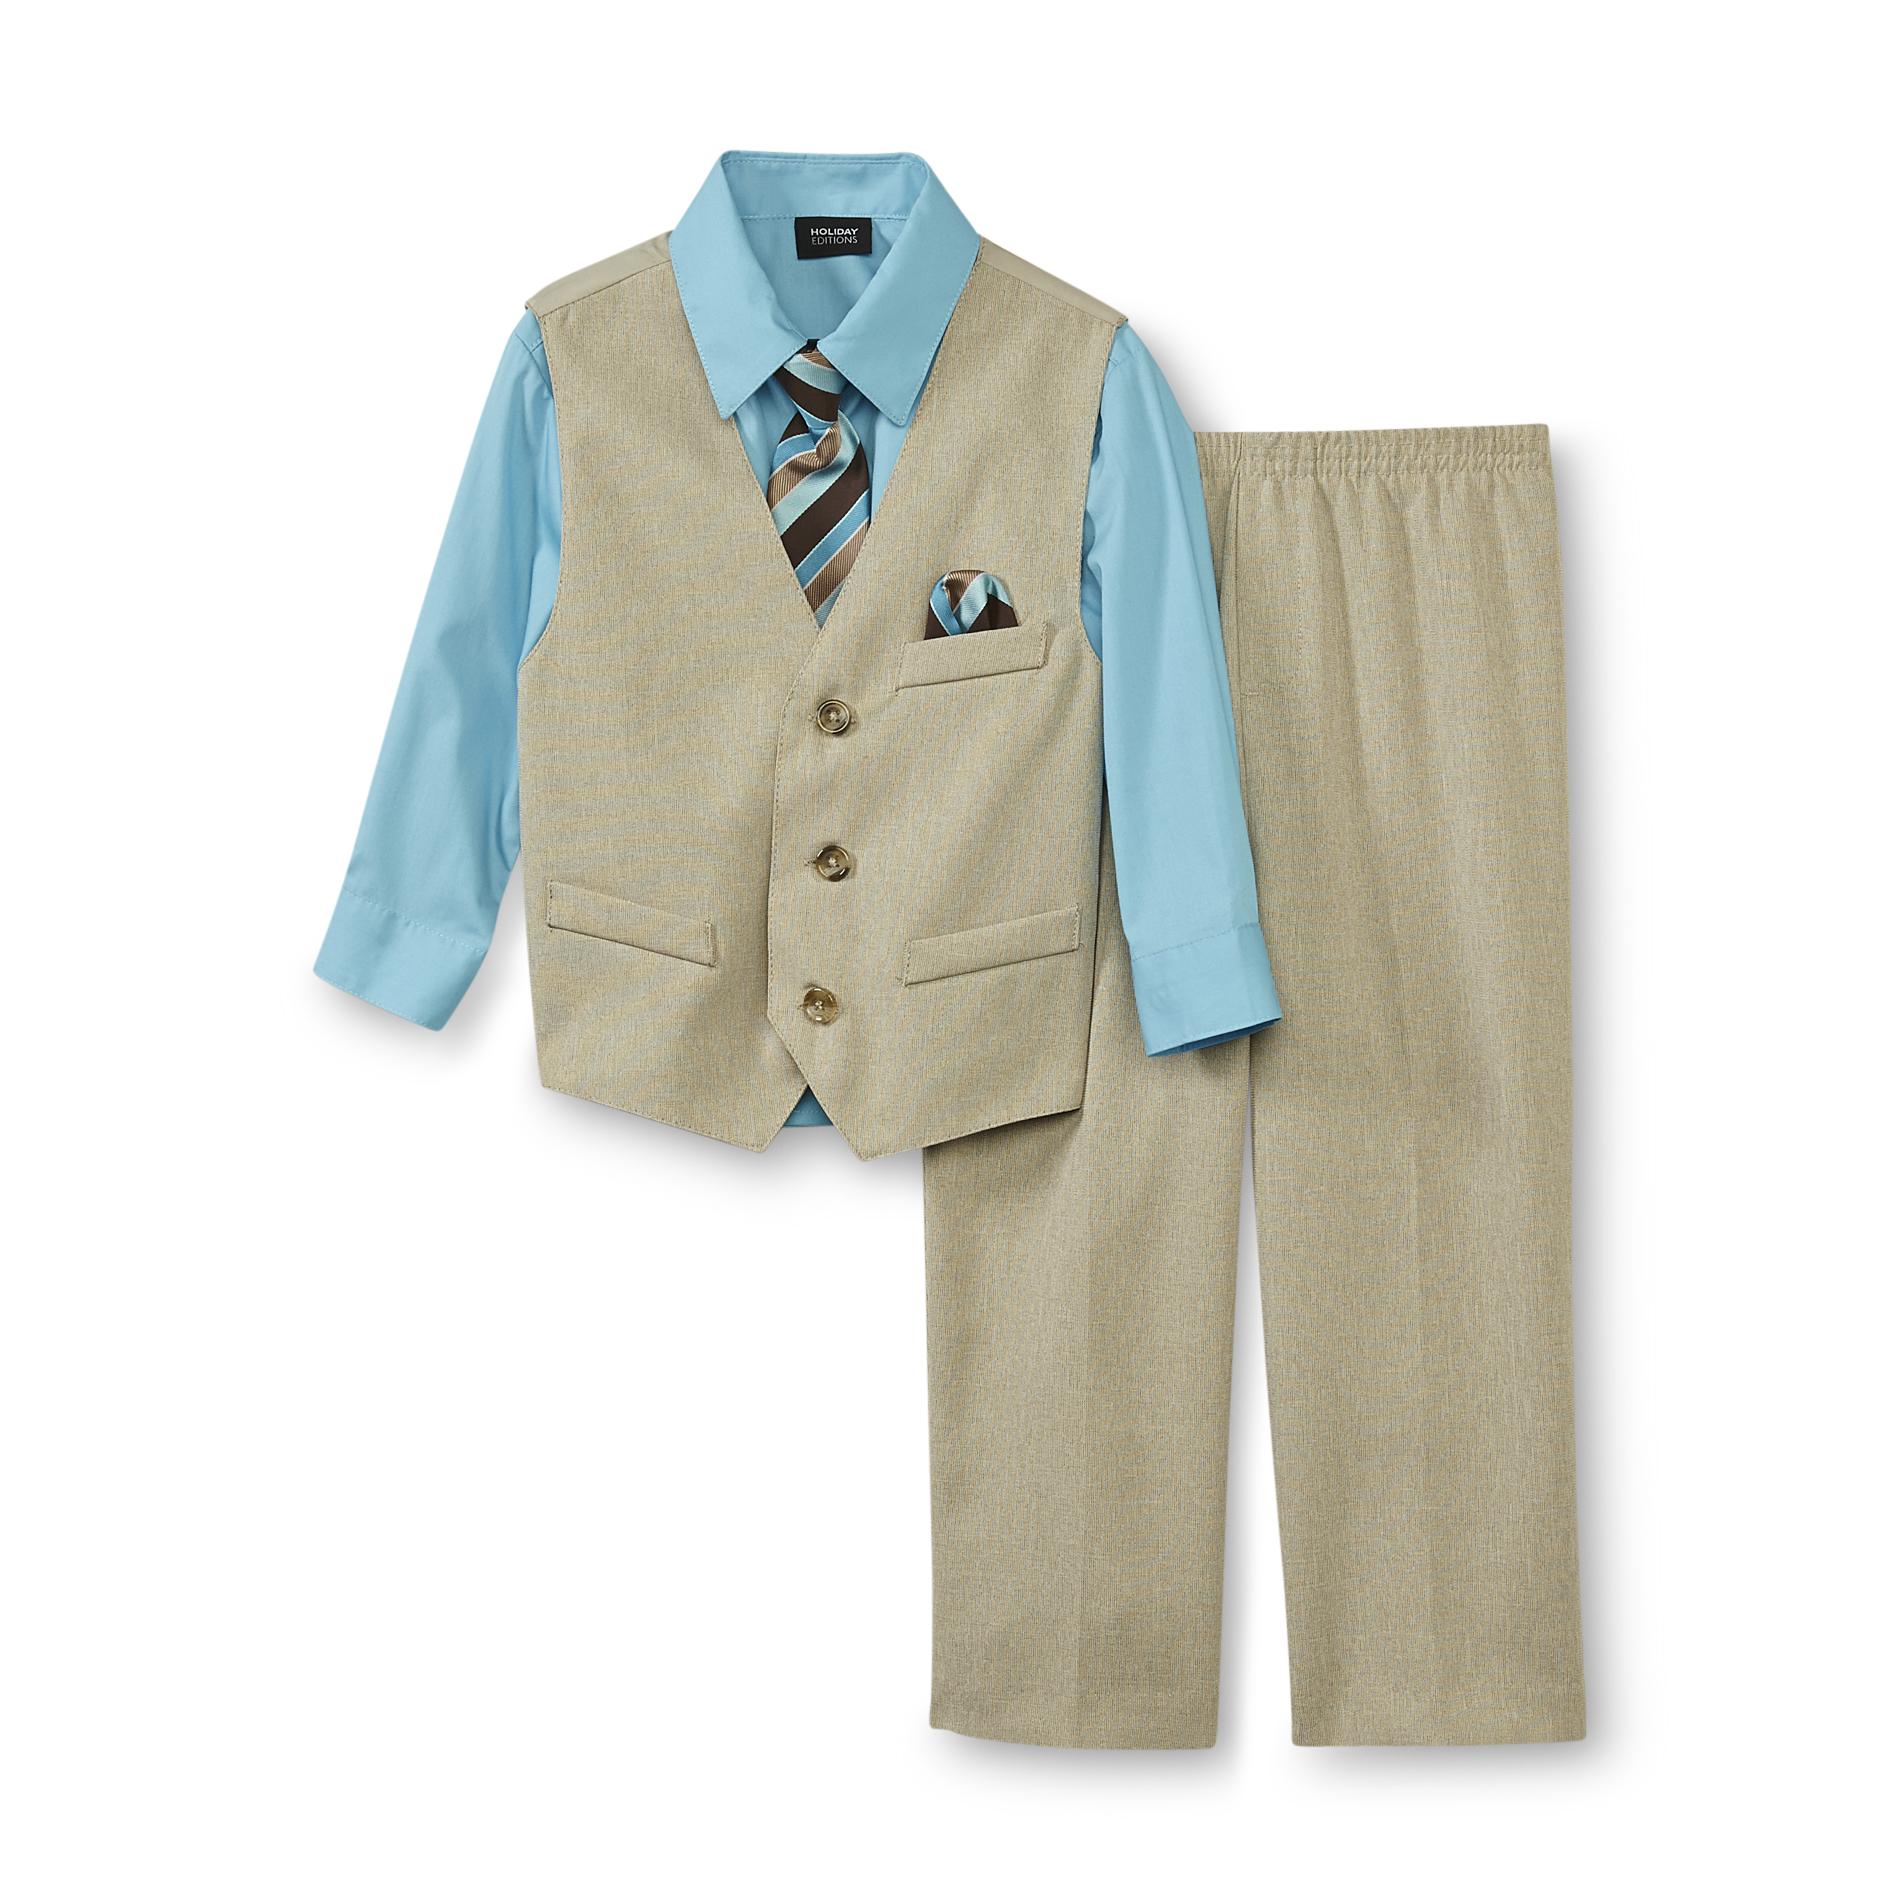 Holiday Editions Infant & Toddler Boy's Shirt  Vest  Necktie & Pants